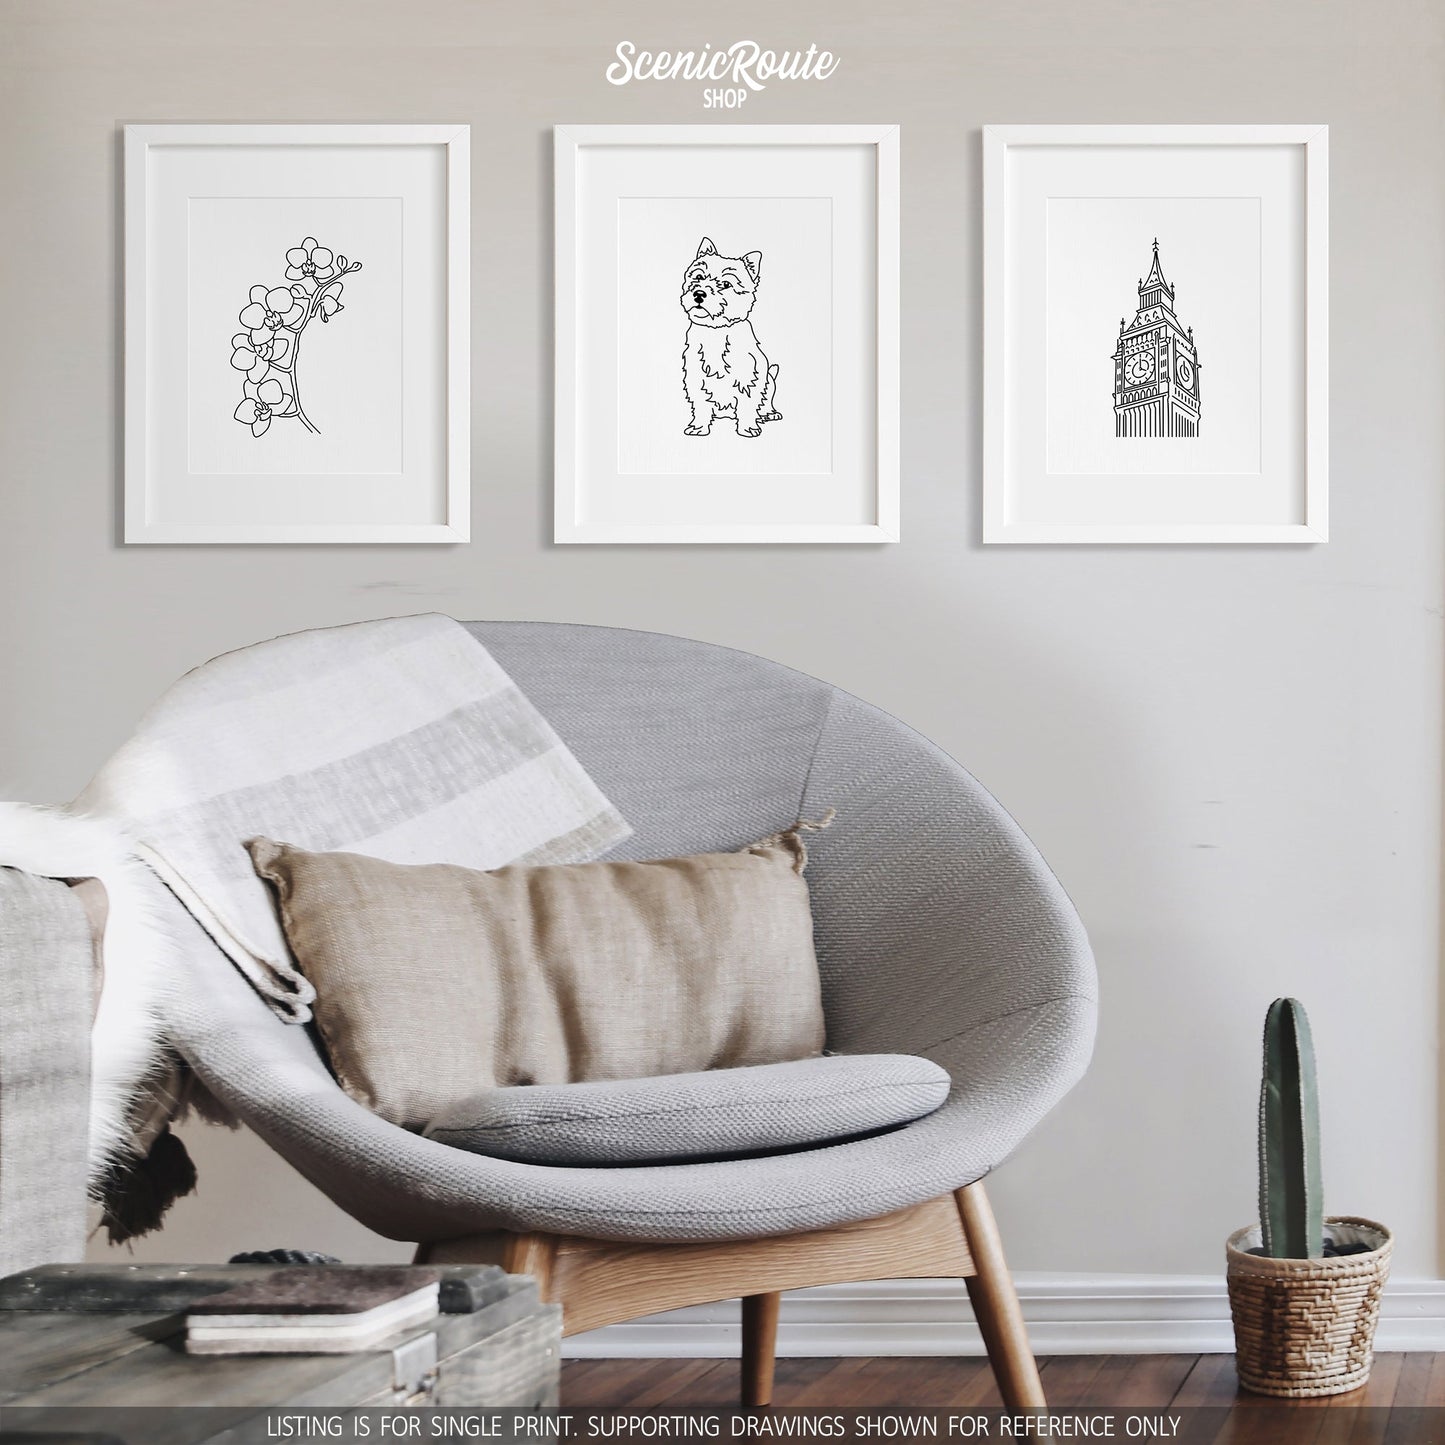 A group of three framed drawings on a white wall above a round chair. The line art drawings include an Orchid Flower, a Norwich Terrier dog, and Big Ben